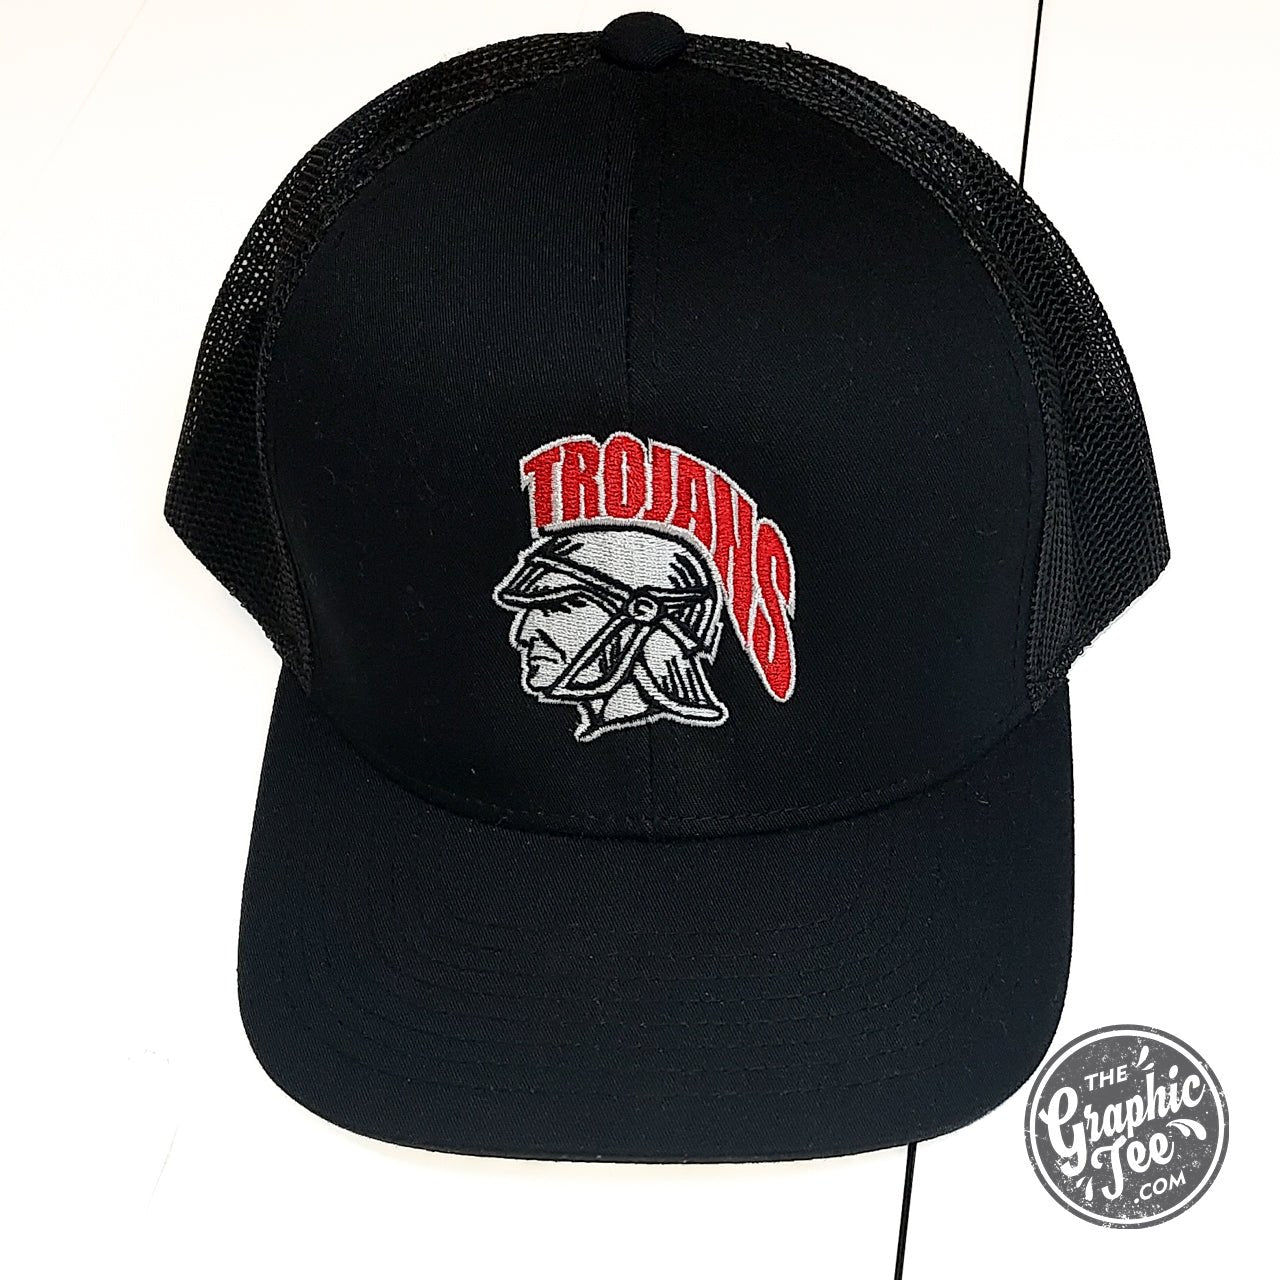 Trojans Black Embroidered Snapback Cap - The Graphic Tee